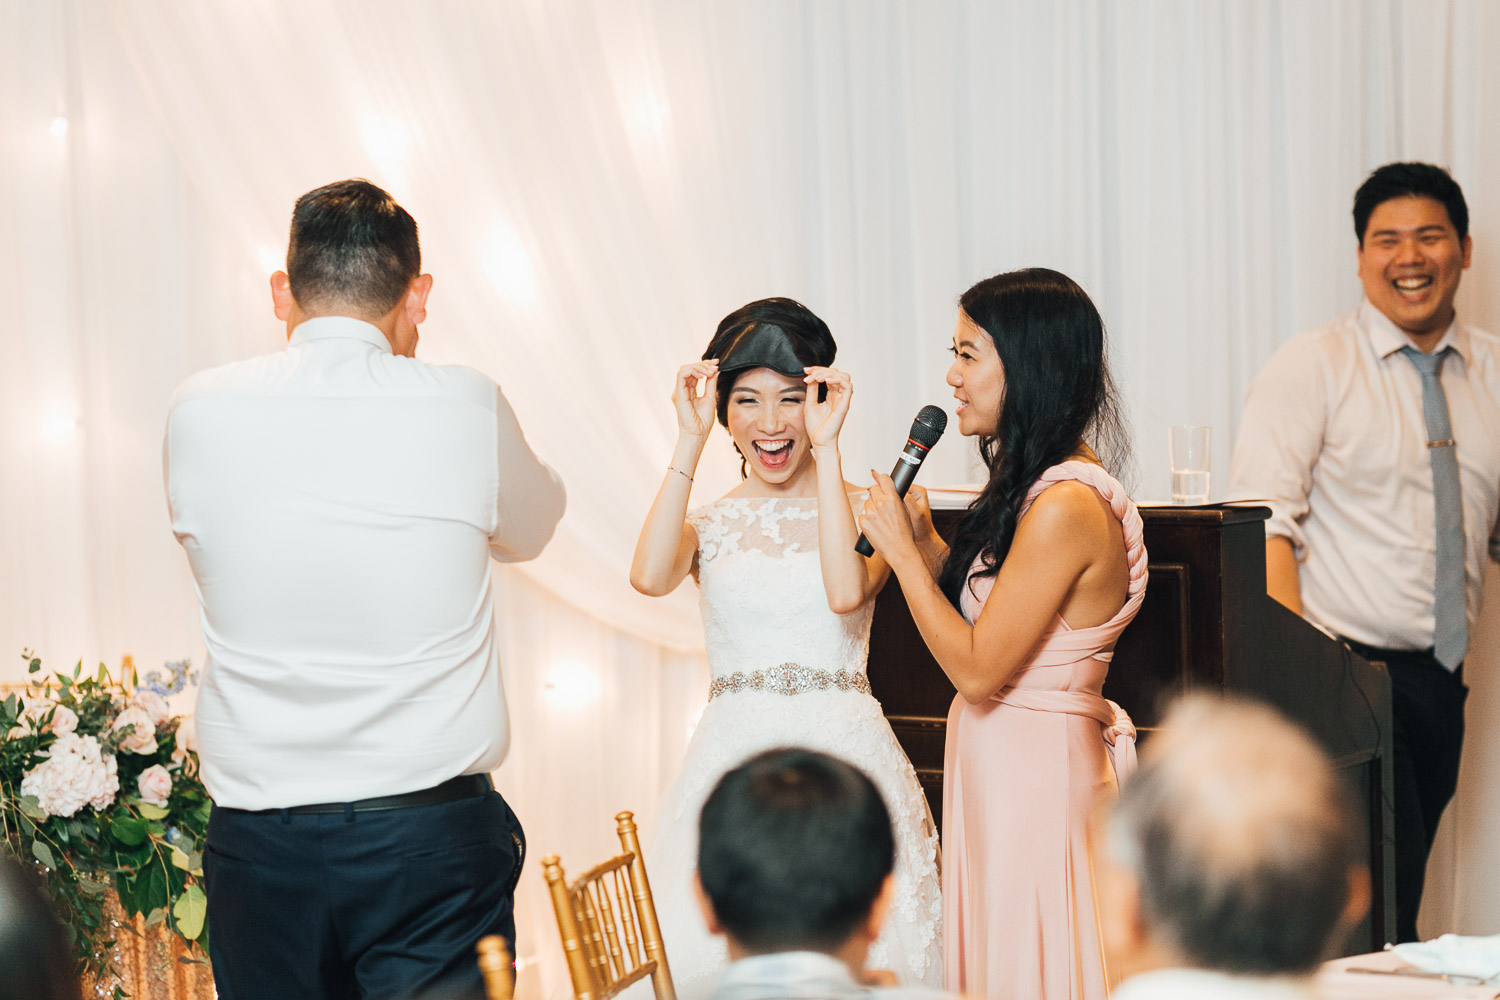 shaughnessy golf and country club wedding reception vancouver photographer